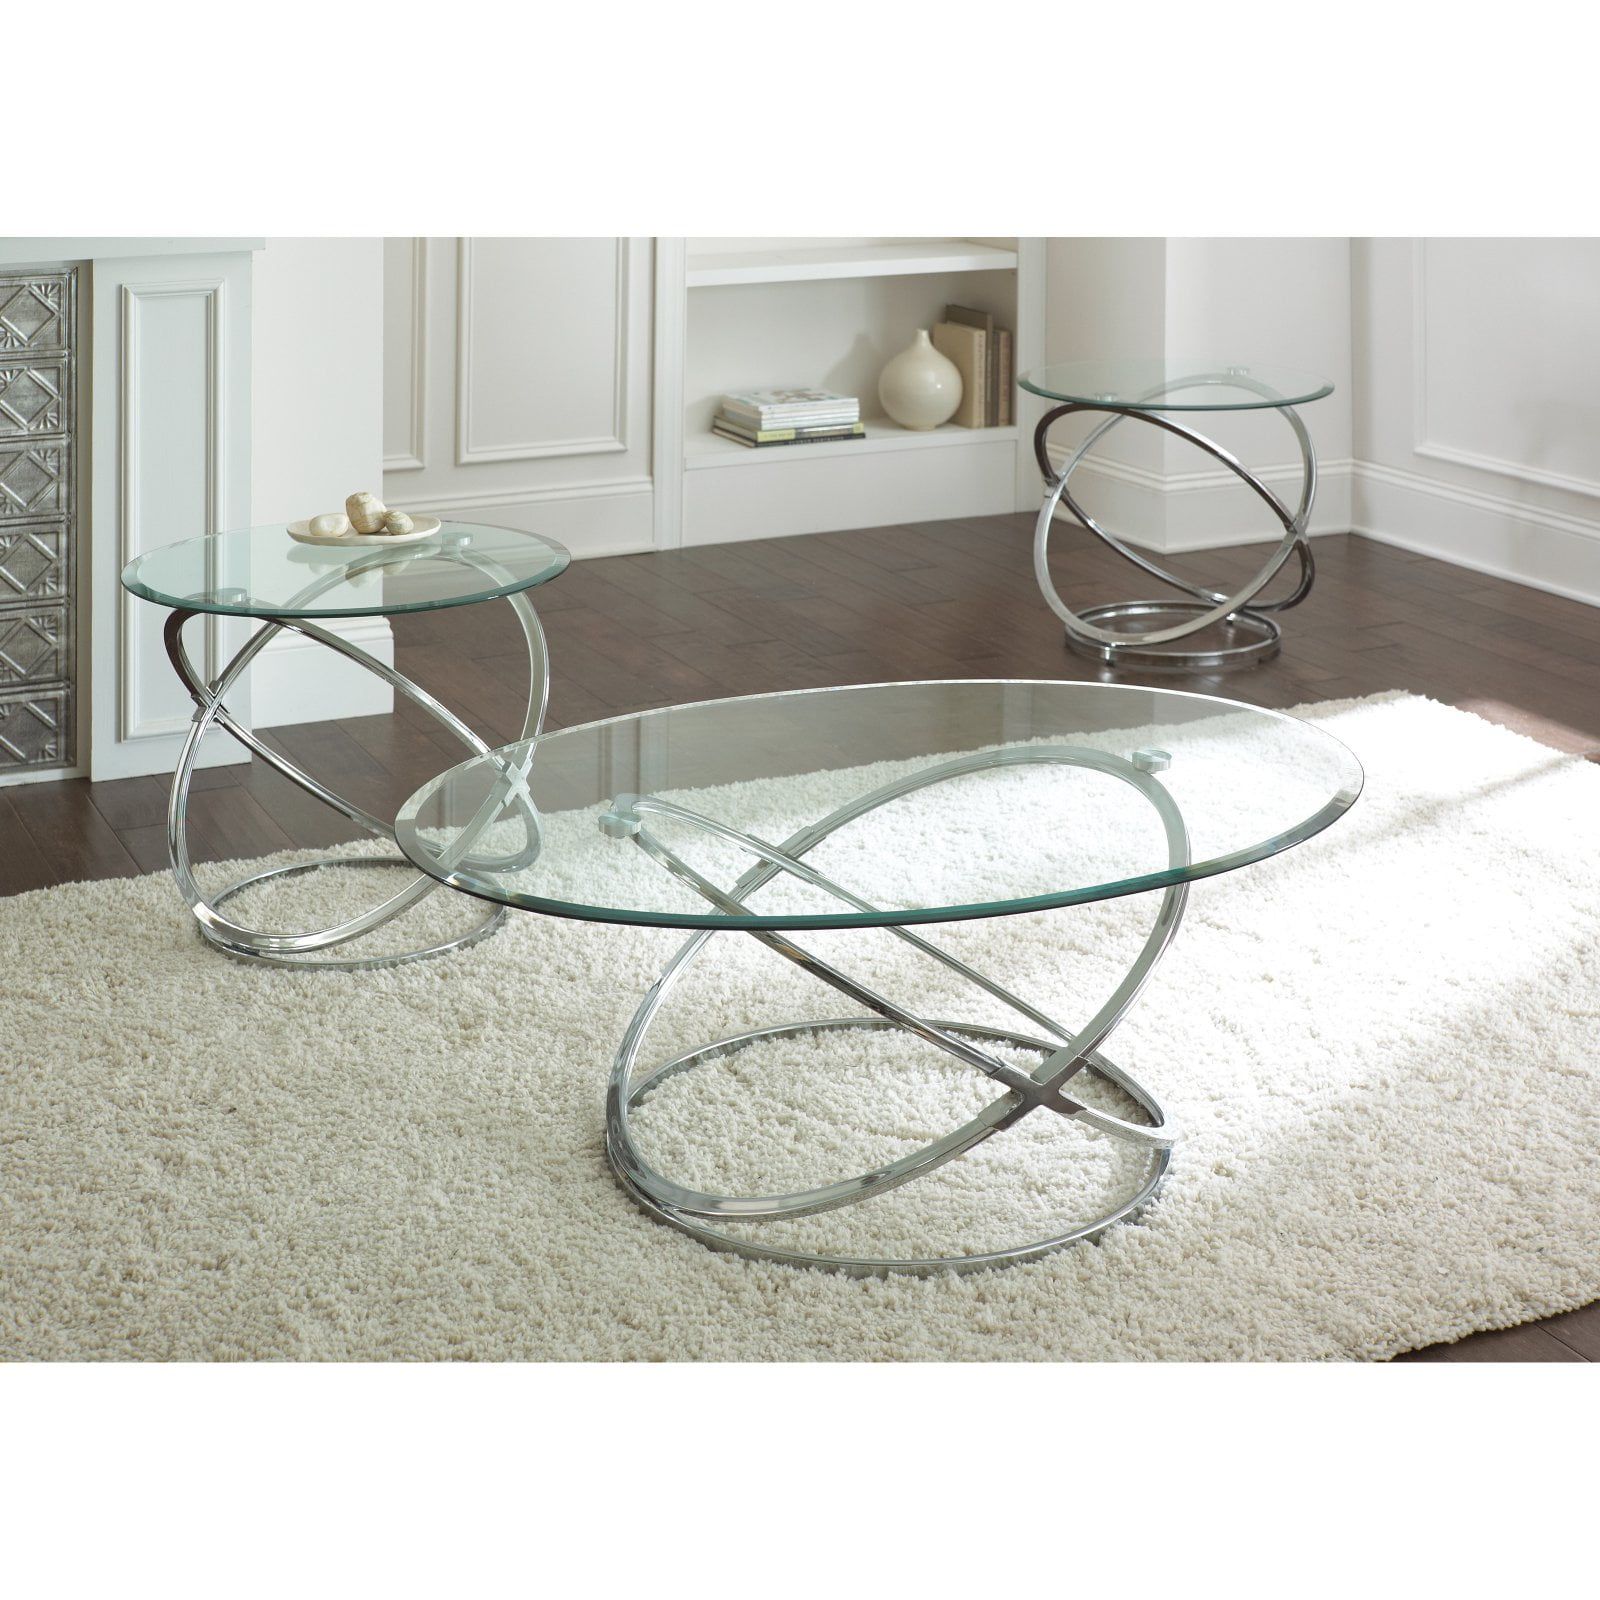 Steve Silver Orion Oval Chrome And Glass Coffee Table Set – Walmart Within Tempered Glass Oval Side Tables (Gallery 19 of 20)